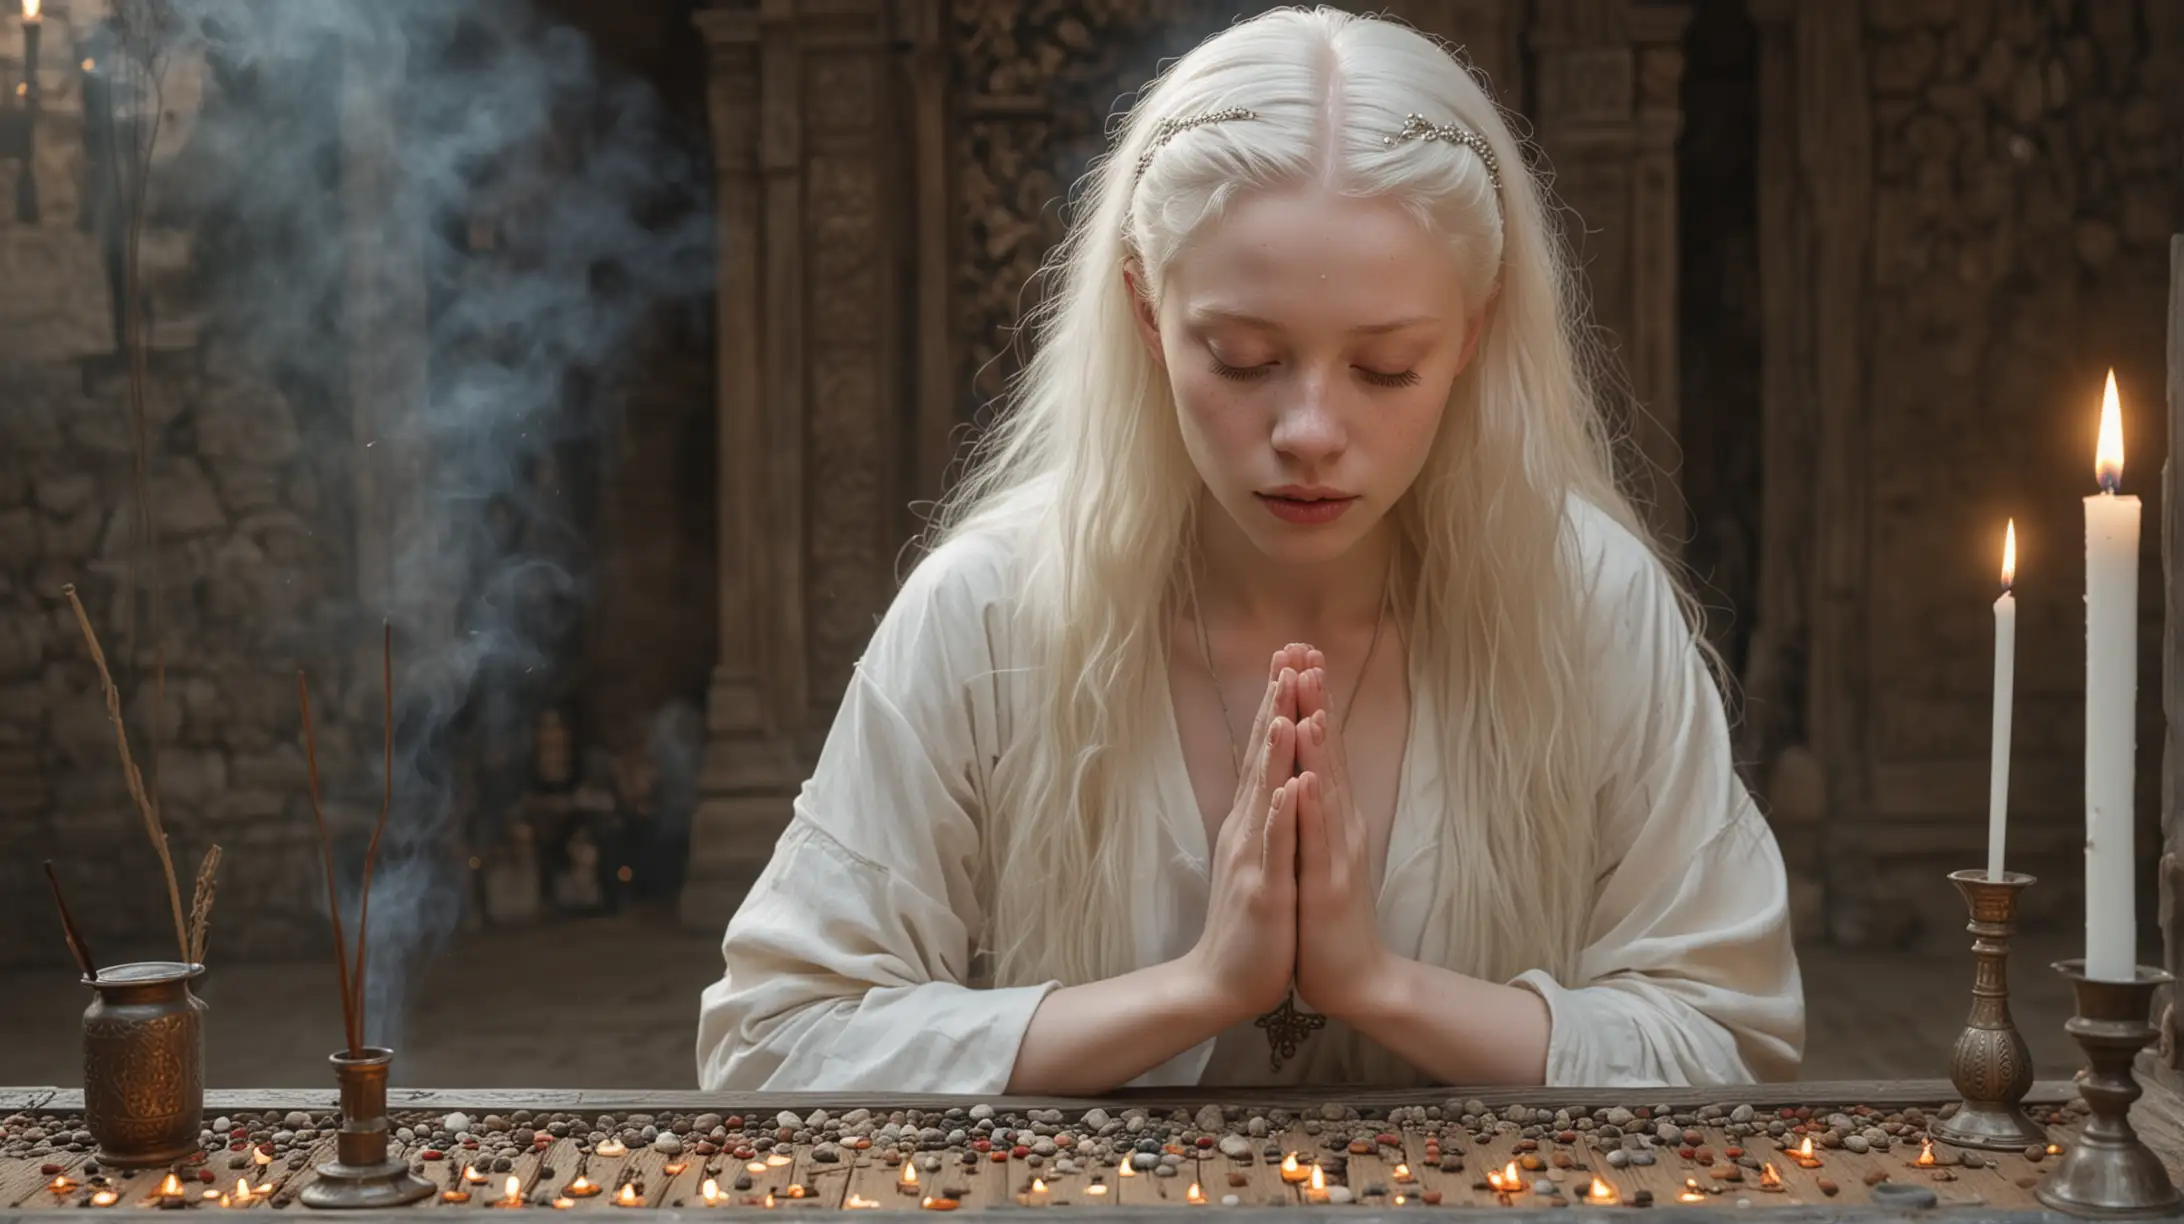 Albino Beauty Praying by IncenseLit Altar in Medieval Setting